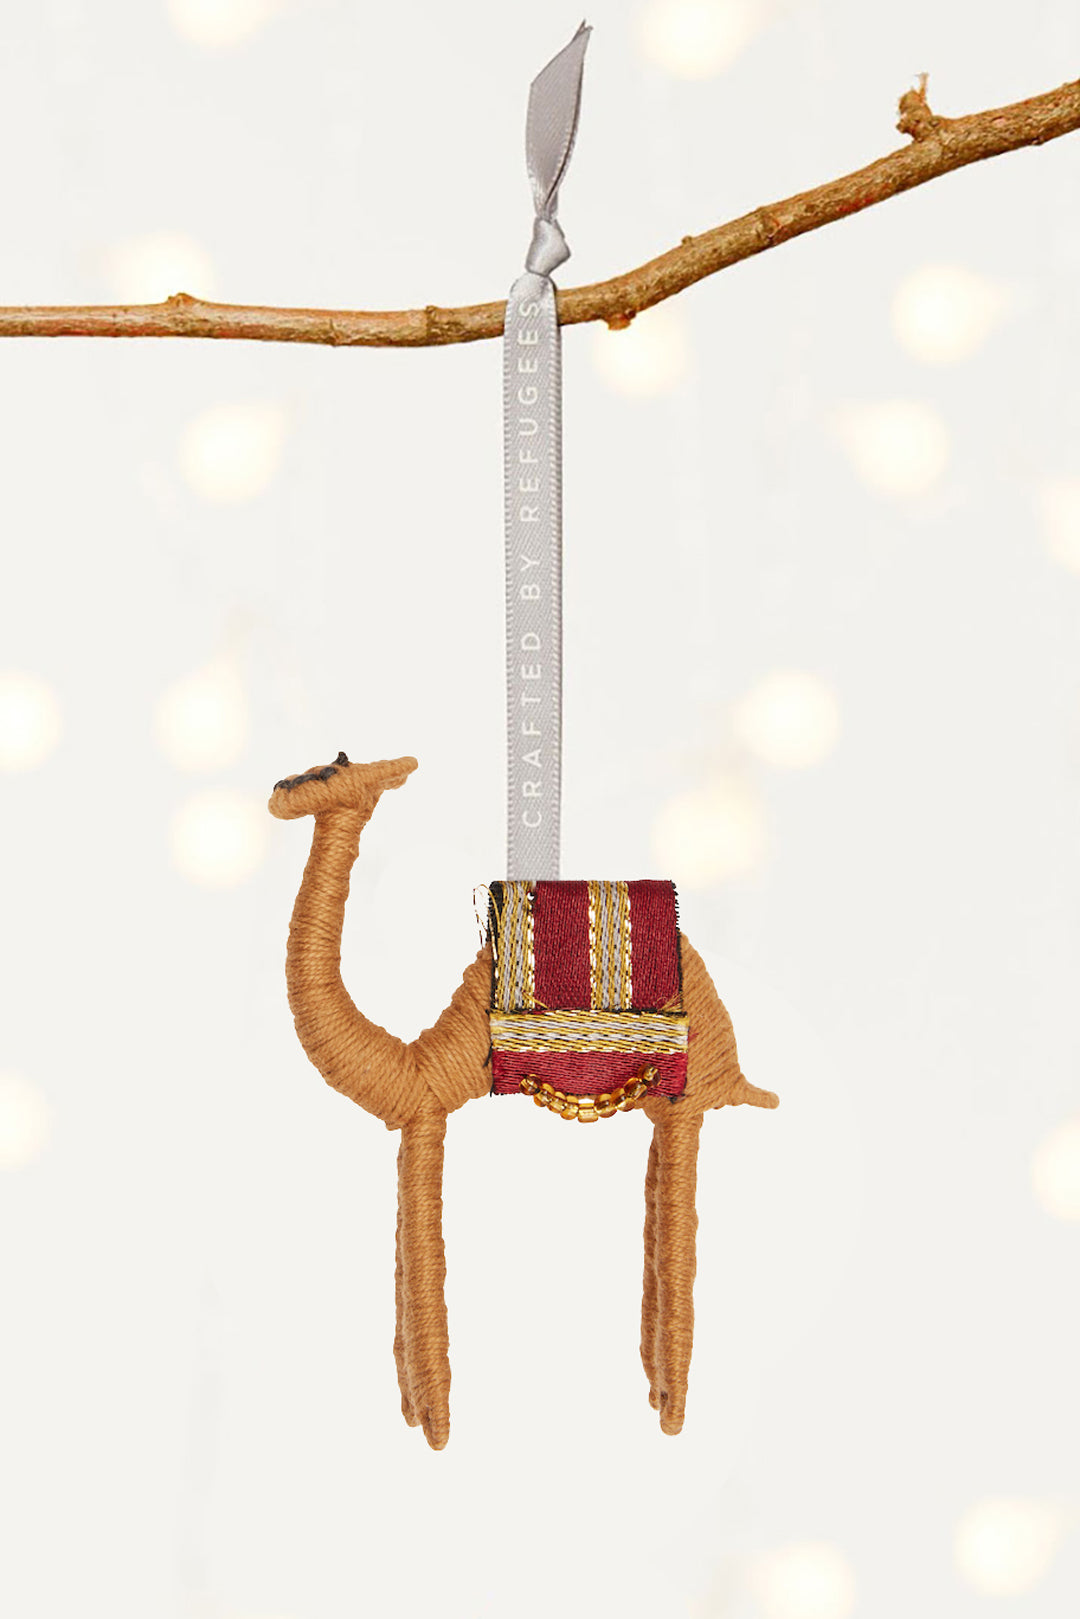 Proud Camel Ornament, Made by Refugees - UN Refugee Agency